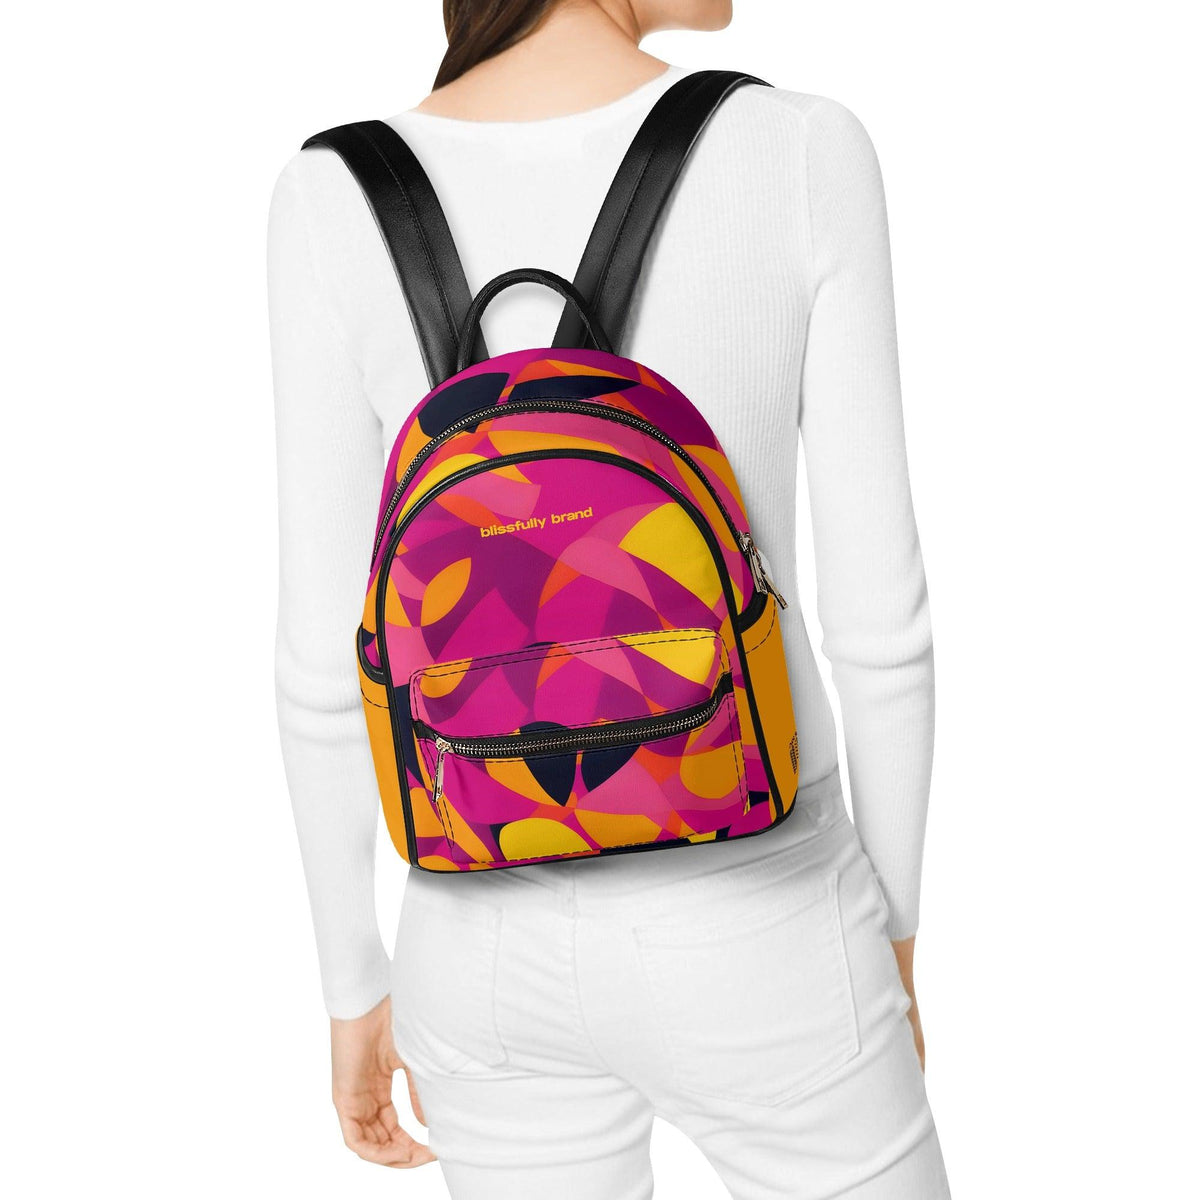 Airline Series Small Vegan Leather Backpack - Abstract Pink Yellow Orange Retro Mod Funky Day Pack Bold Vibrant Travel Urban Women's All Over Print Blissfully Brand Flight 929 Munich